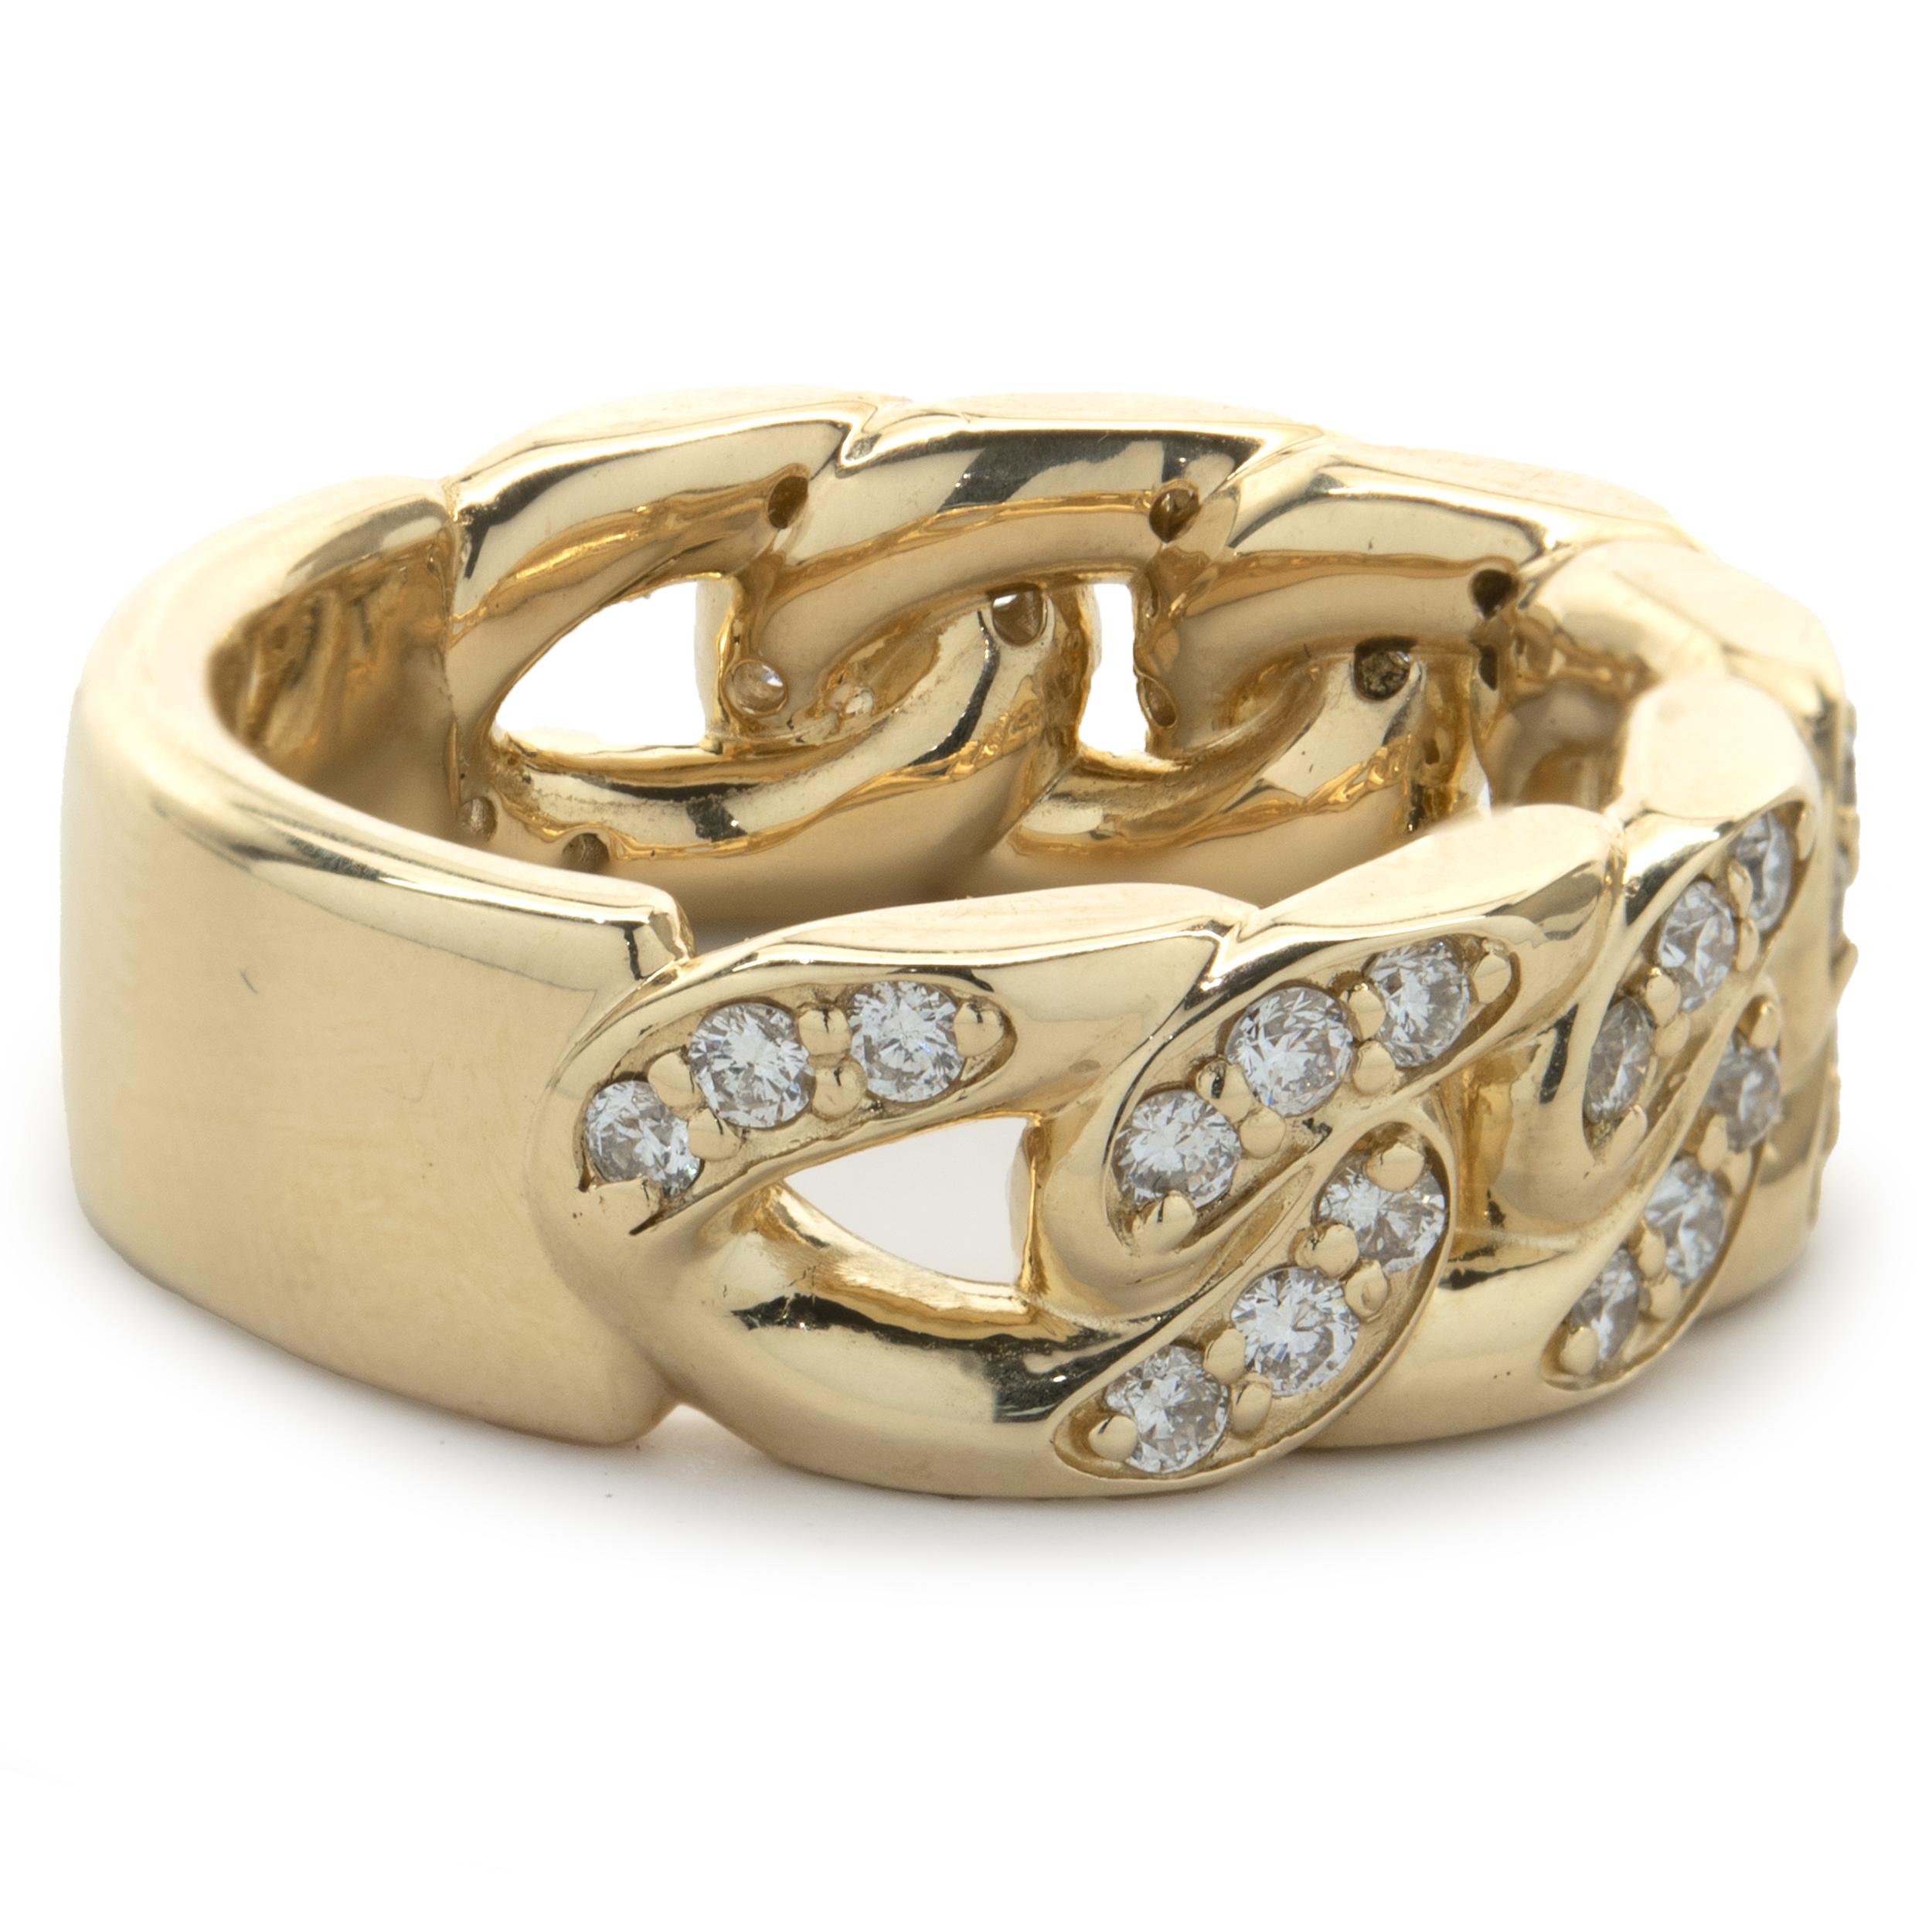 Designer: custom
Material: 14K yellow gold
Diamond: 42 round brilliant cut = .84cttw
Color: G
Clarity: SI1
Ring size: 9.5 (please allow two additional shipping days for sizing requests)
Weight:  18.26 grams
